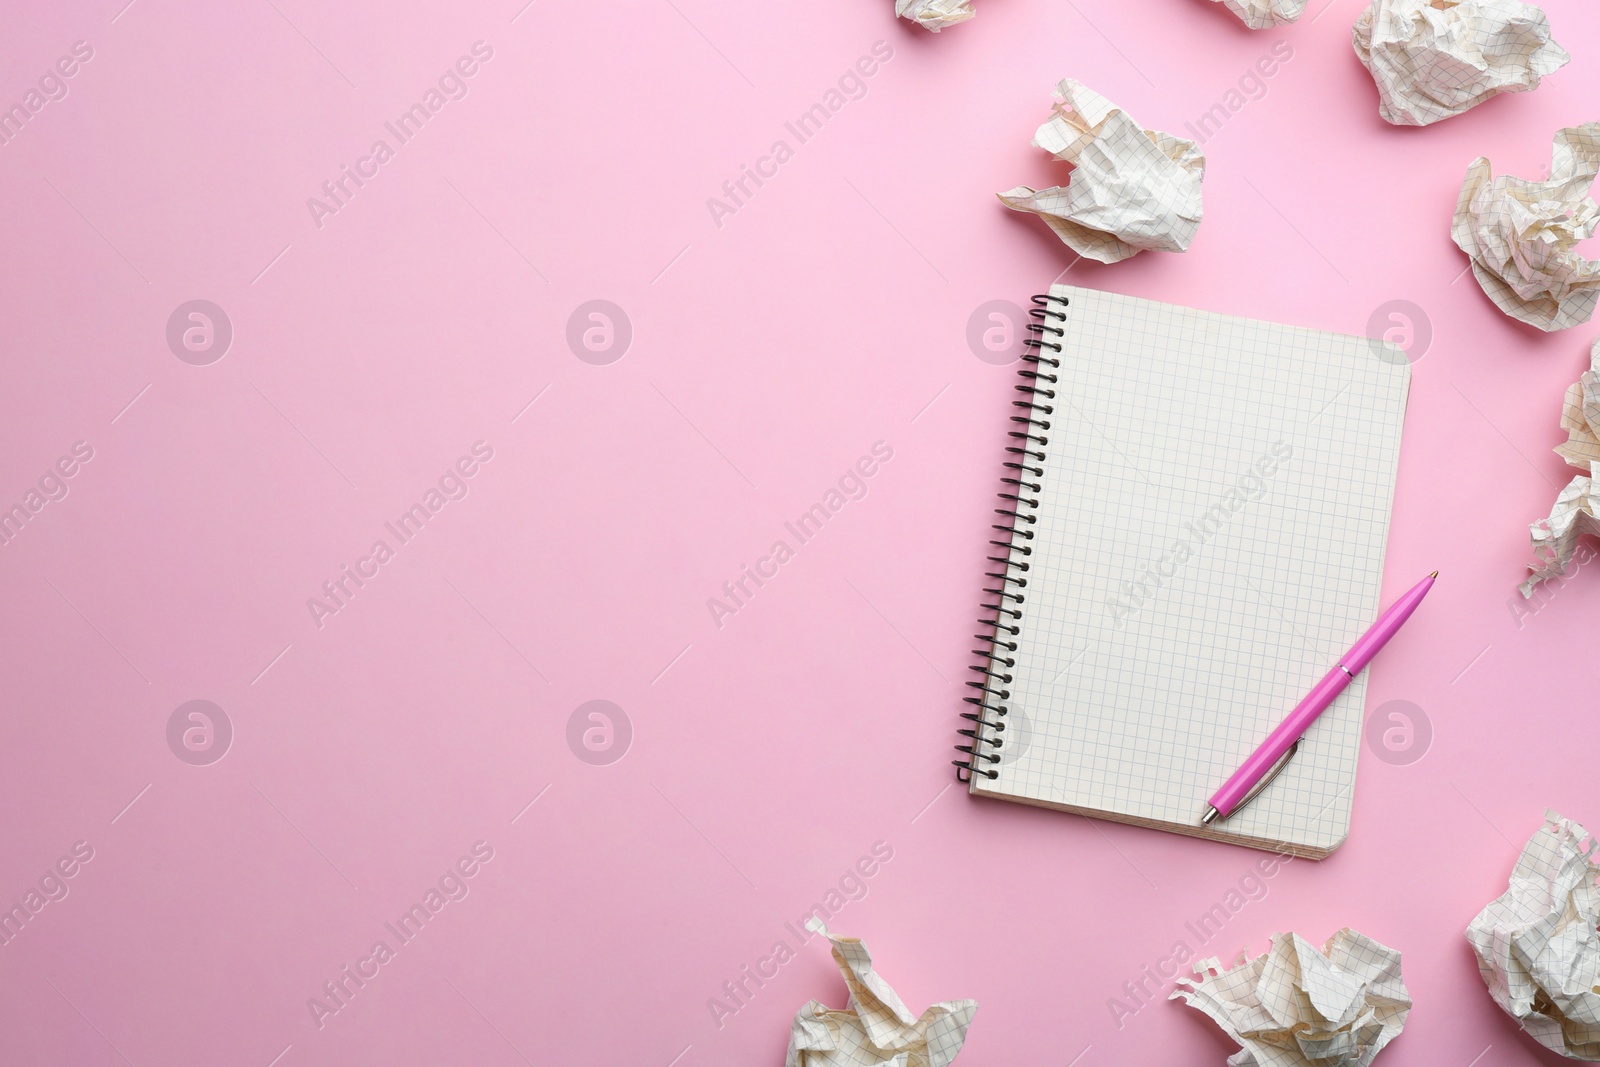 Photo of Notebook, pen and crumpled sheets of paper on light pink background, flat lay. Space for text